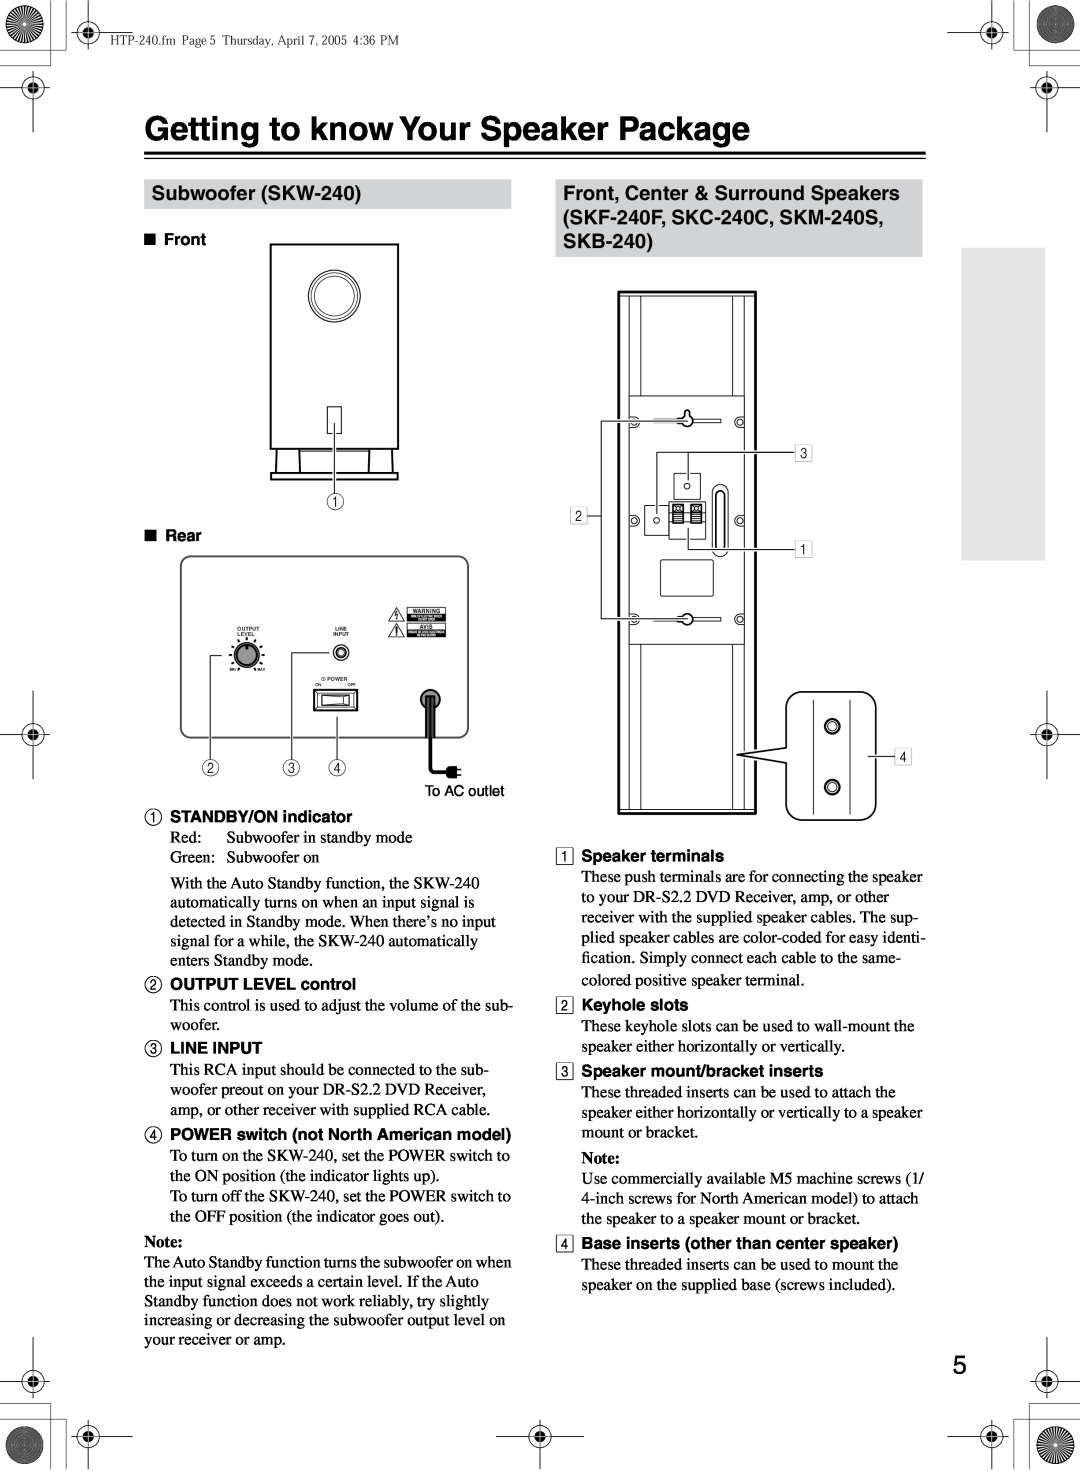 Onkyo HTP-240, SKS-HT240 instruction manual Getting to know Your Speaker Package, Subwoofer SKW-240 